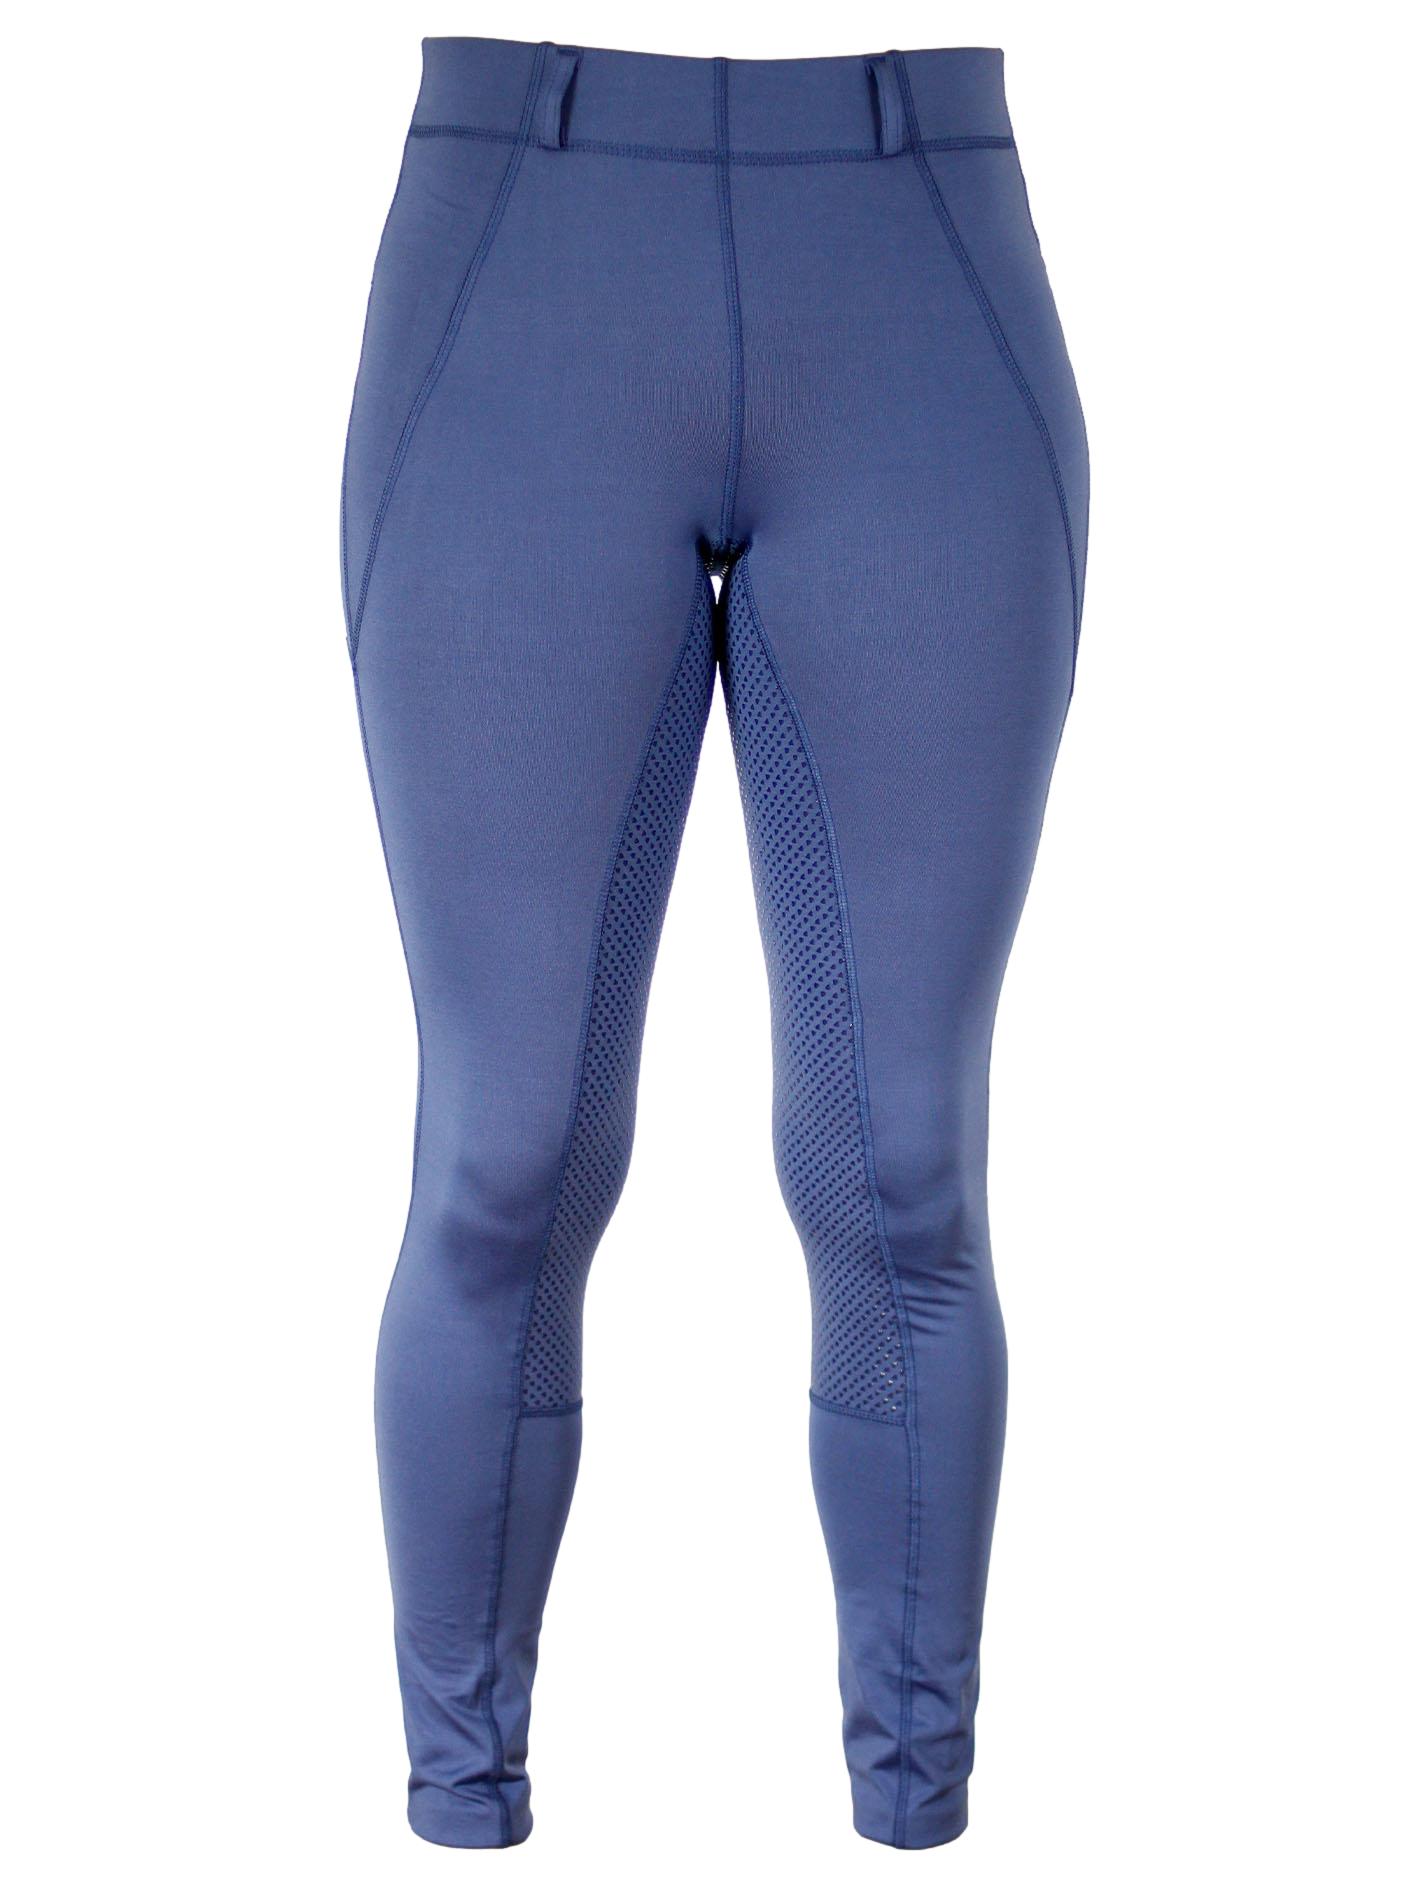 Blue horse riding tights with mesh panels, no model displayed.